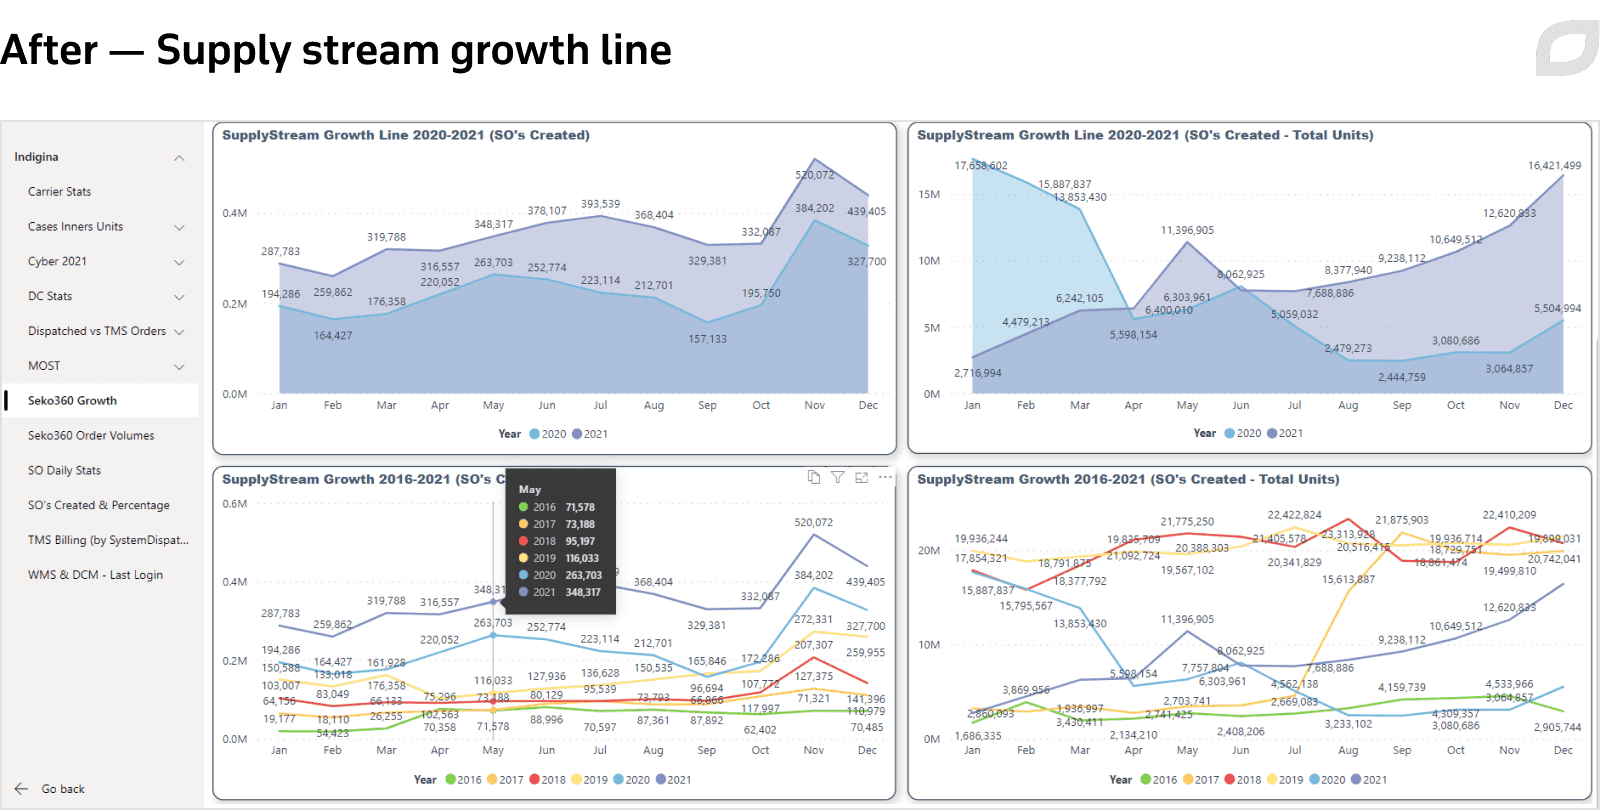 After - Supply stream growth line